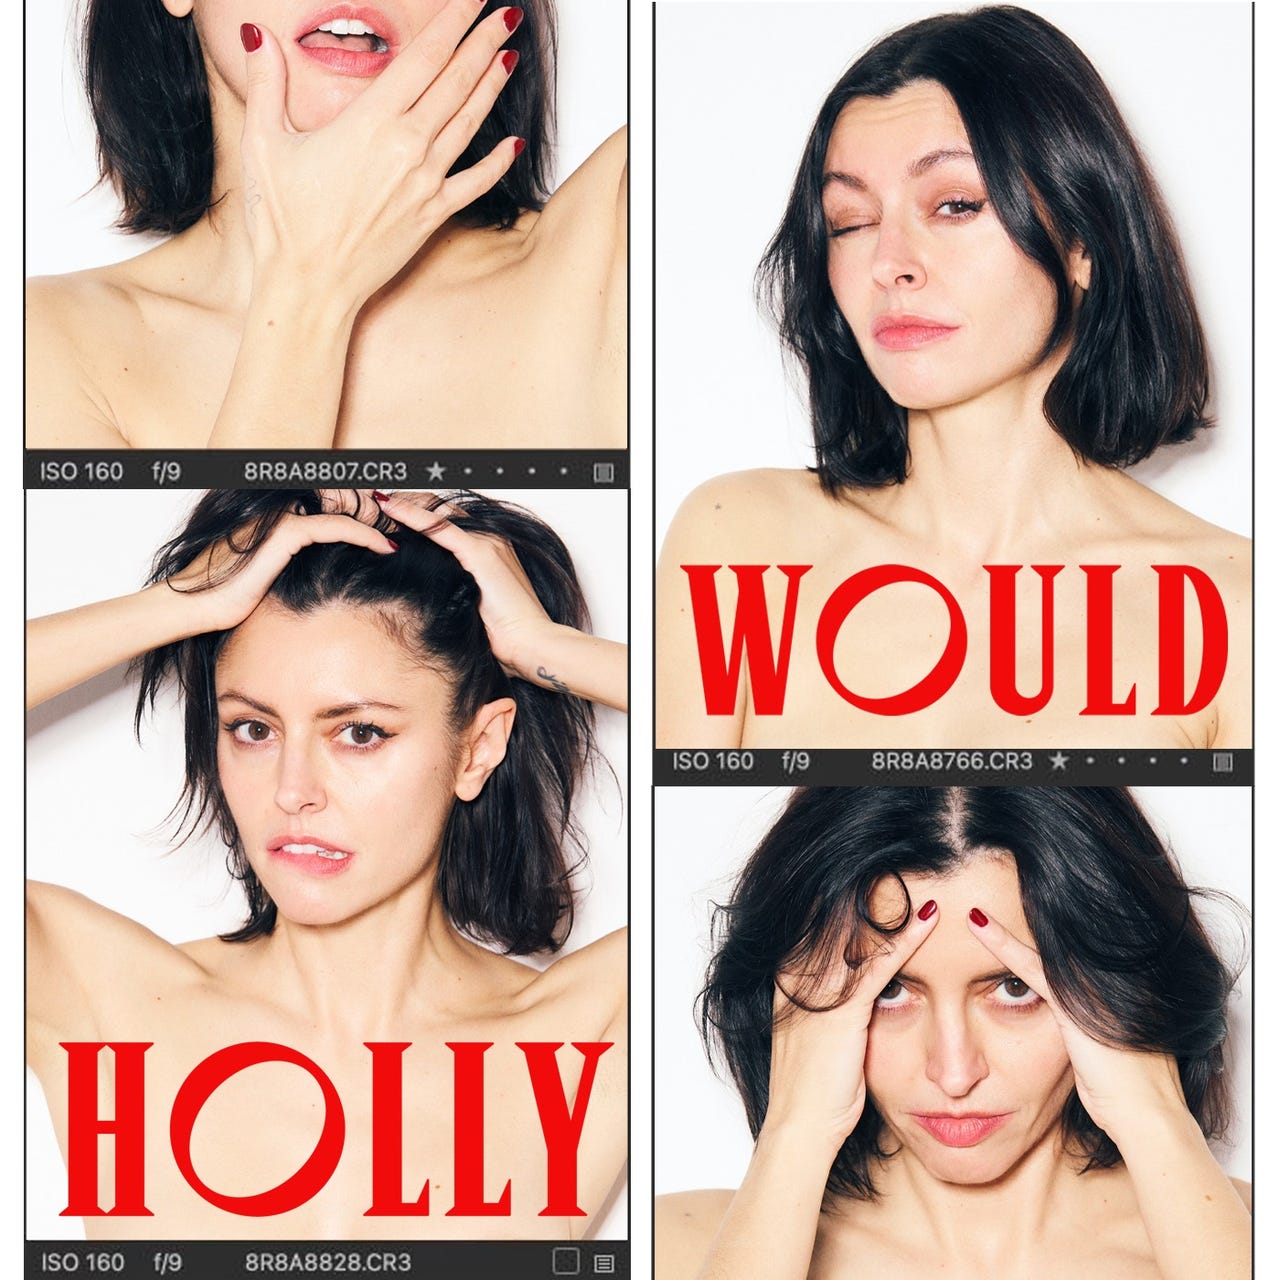 HollyWould